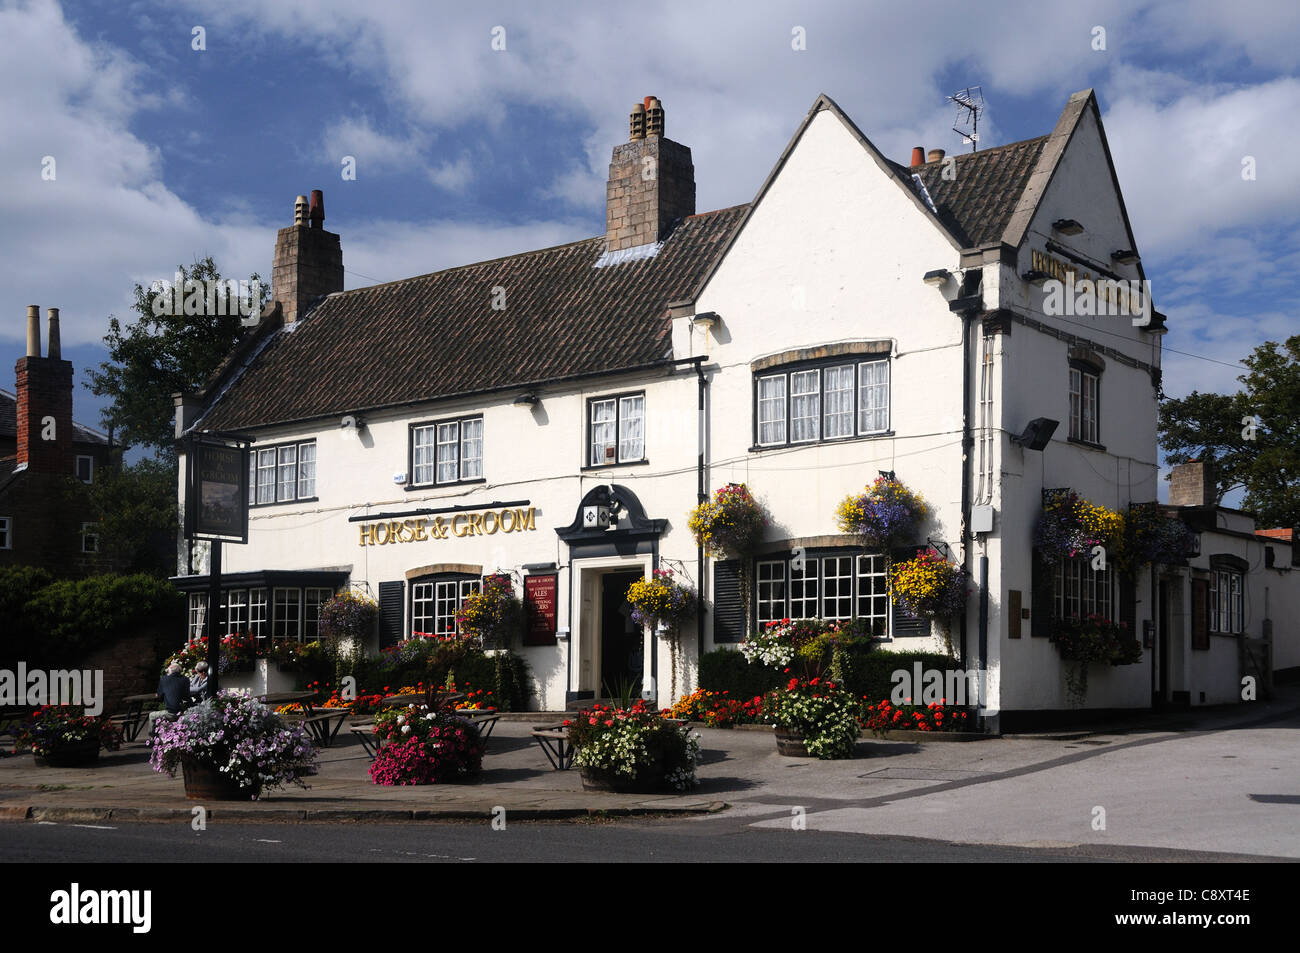 The Horse & Groom, in Linby, Nottinghamshire, England Stock Photo